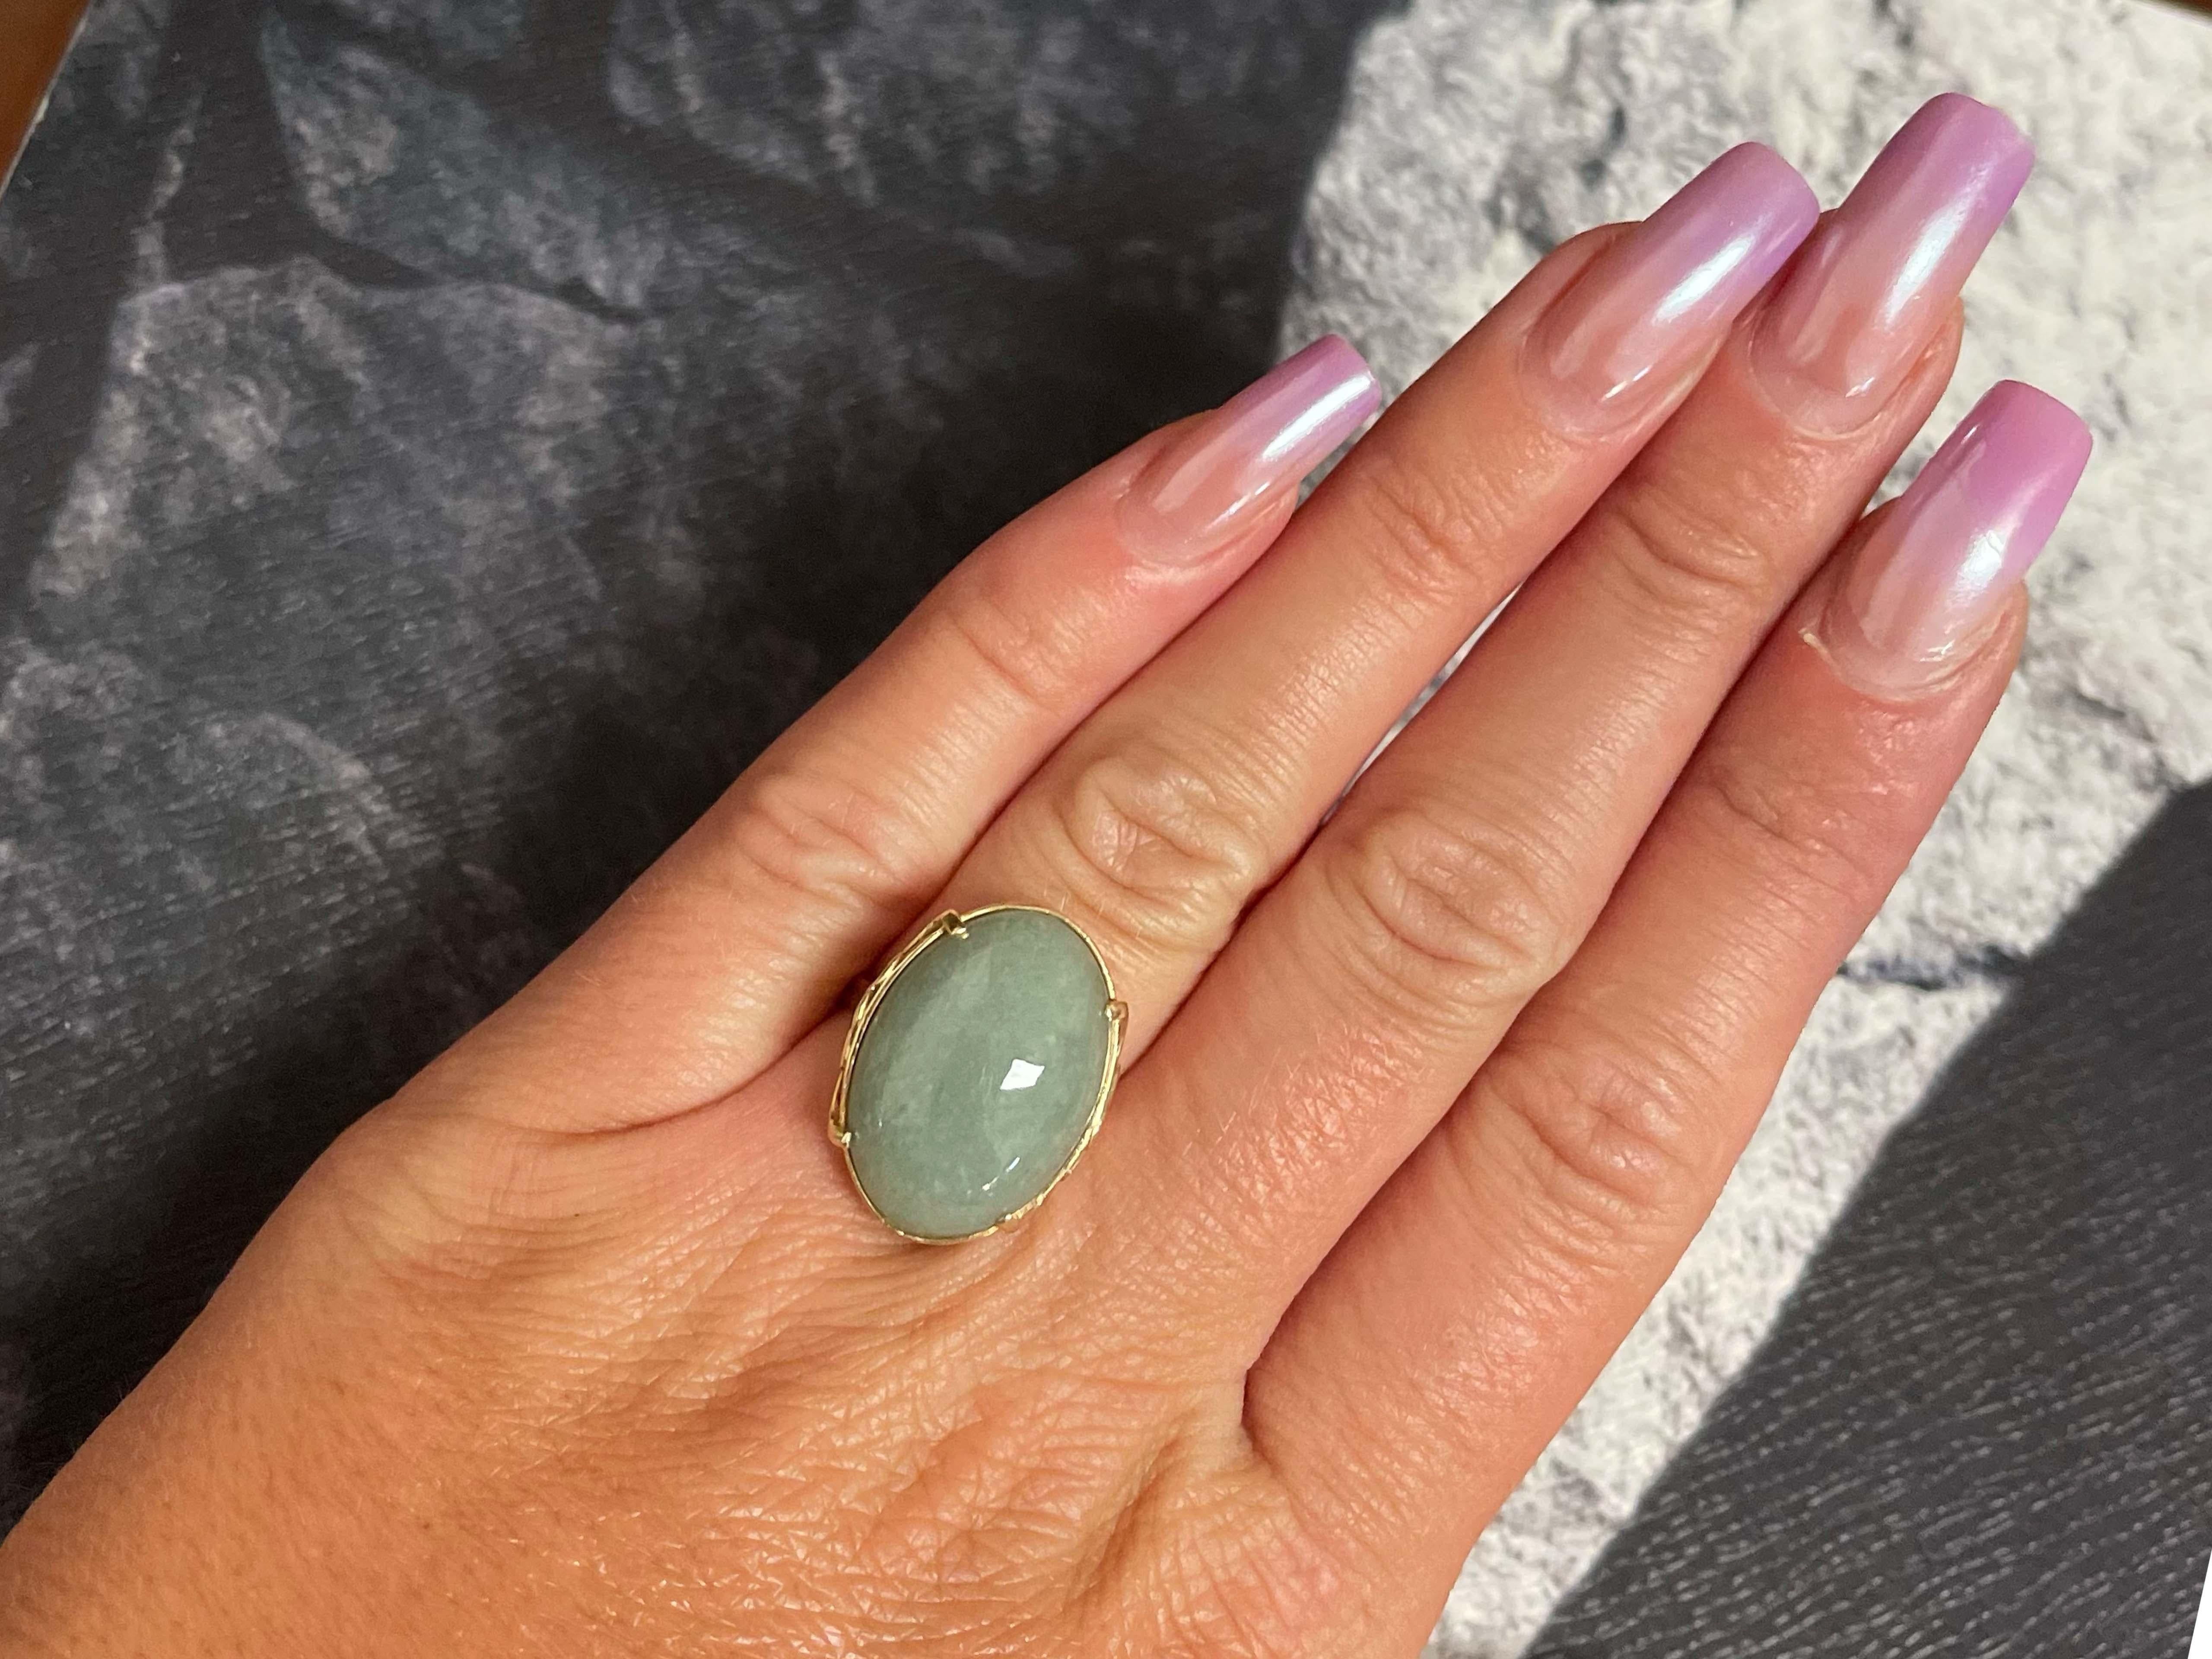 Ring Specifications:

Designer: Ming's

Stone: Jade
​
​Jade Measurements: 21.5 mm x 15.3 mm x 6.2 mm

Metal: 14k Yellow Gold

Total Weight: 6.6 Grams

Ring Size: 6 (resizable) please message us for resizing BEFORE purchasing

Stamped: 